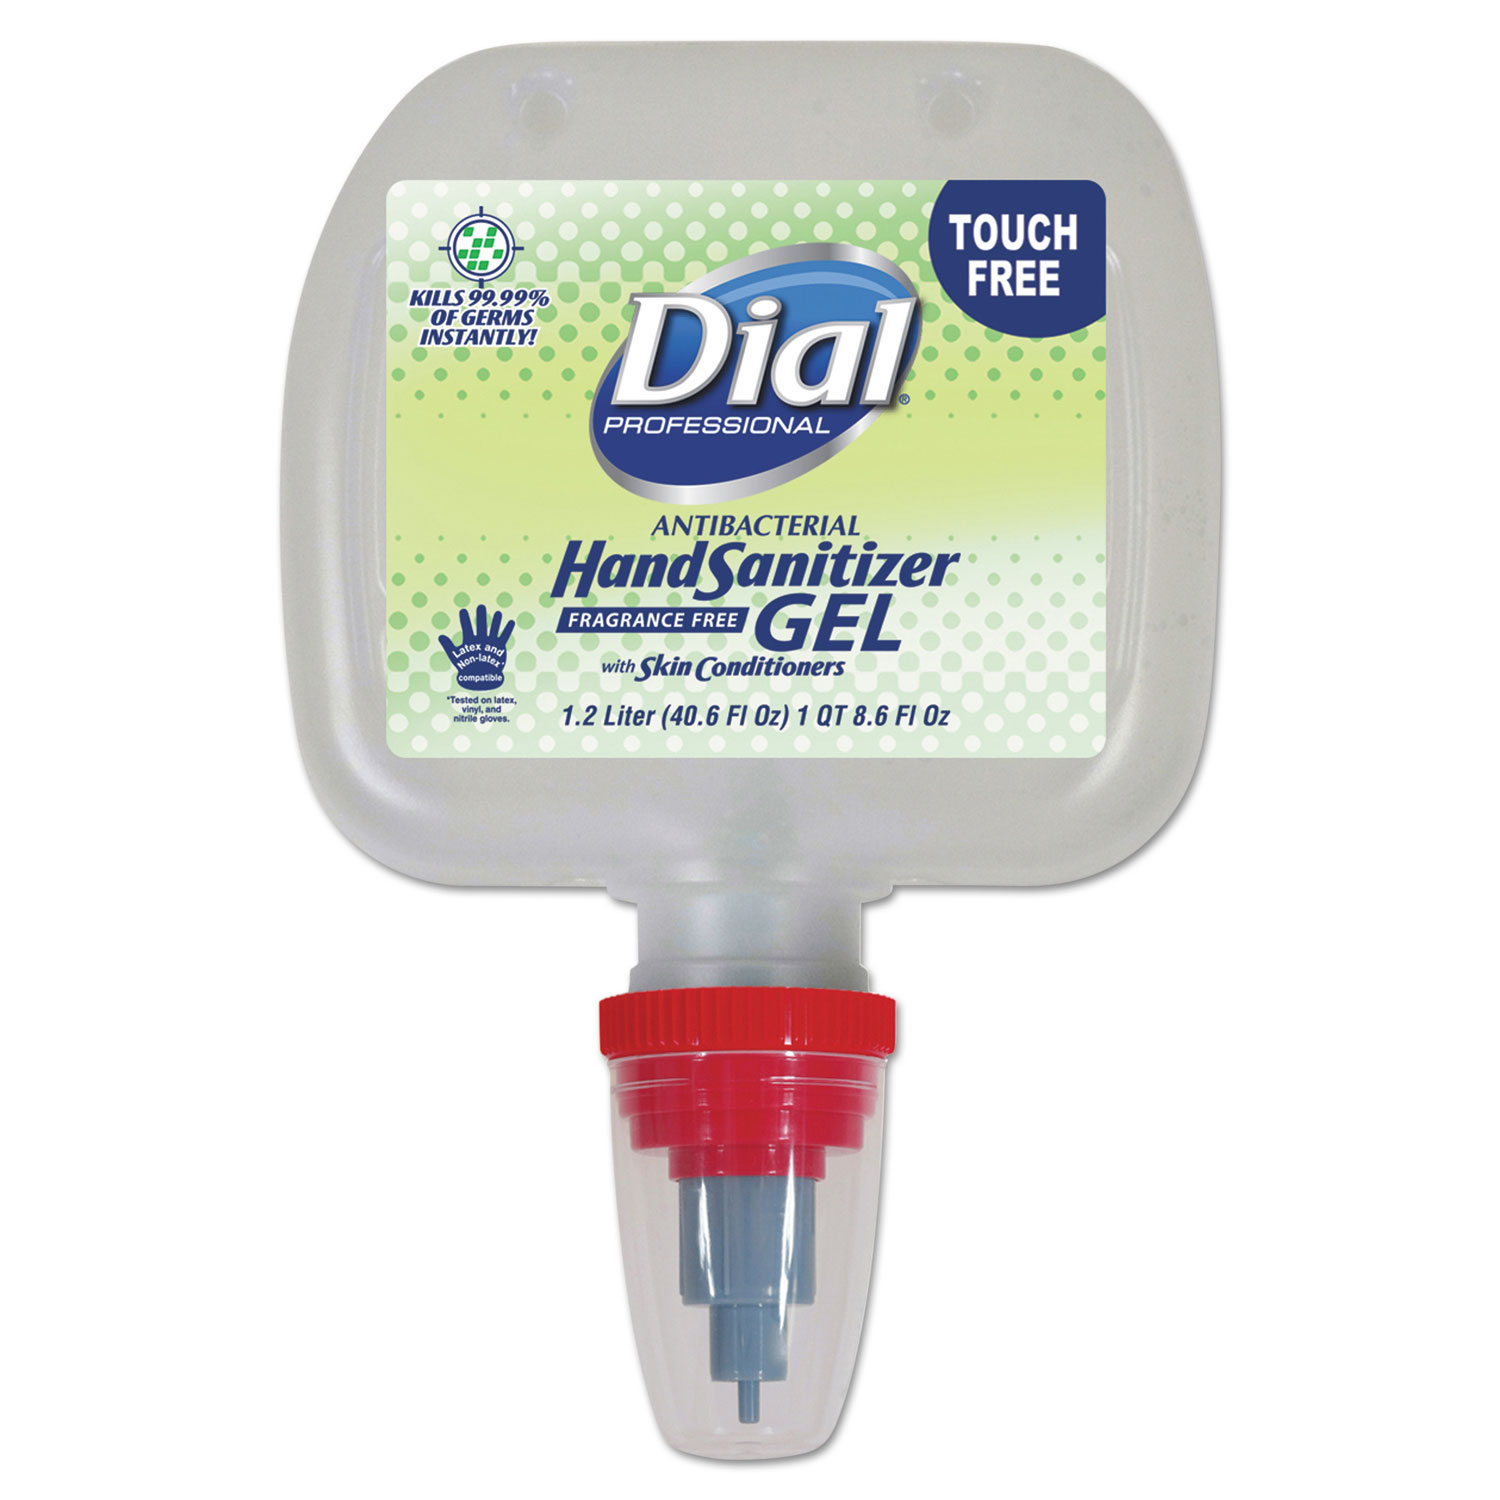  Dial Professional 17000134130 Duo Touch-Free Gel Hand Sanitizer Refill, 1.2 L, Fragrance-Free, 3/Carton (DIA13413CT) 